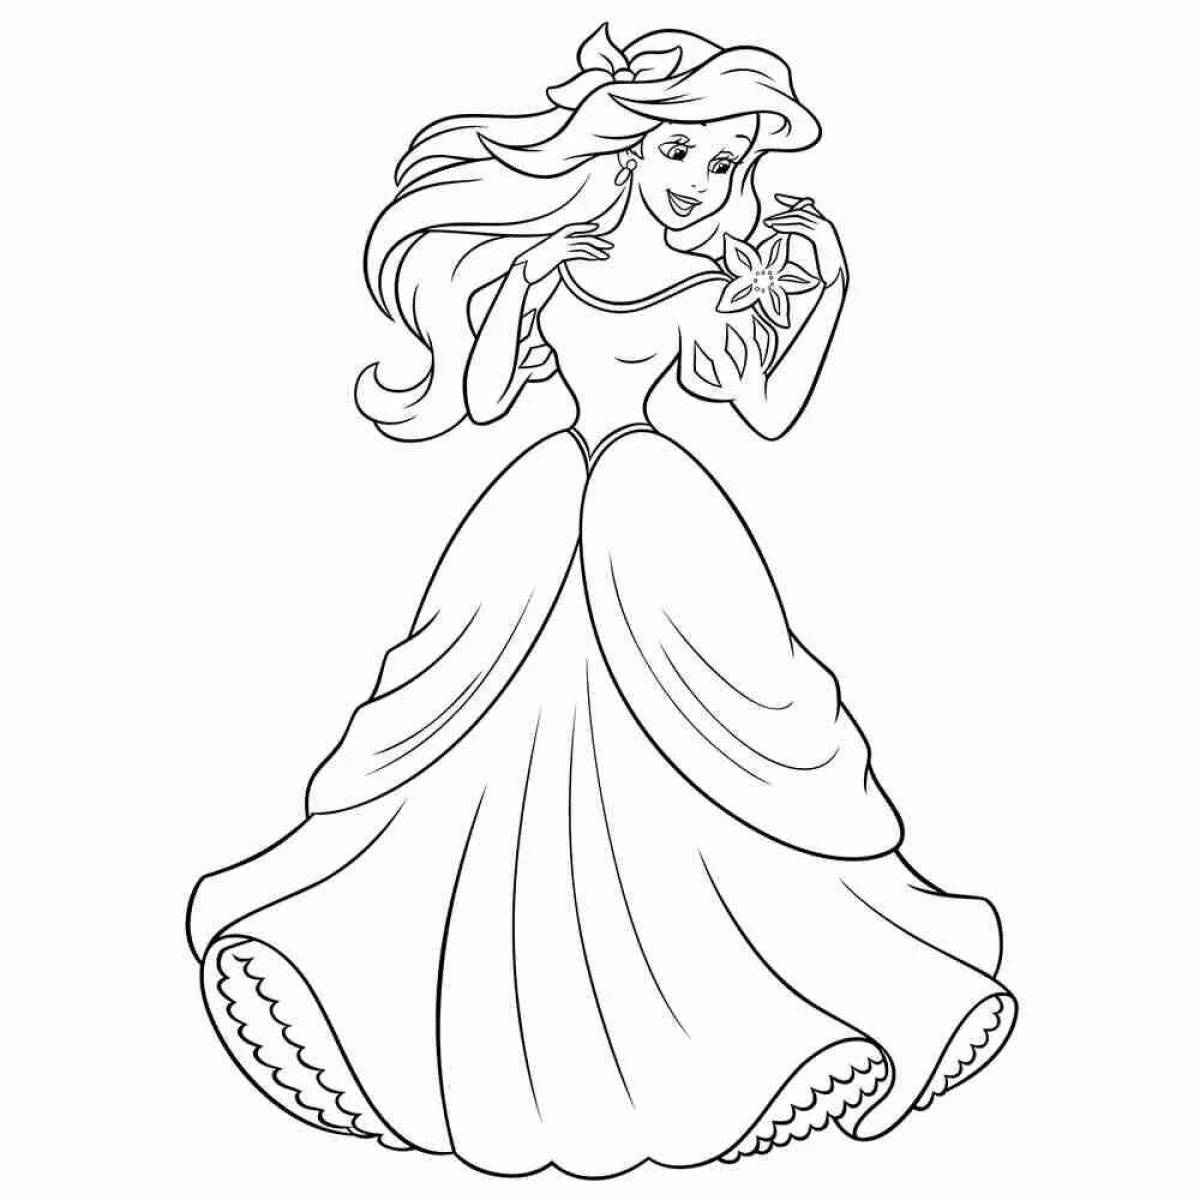 Exalted coloring page include princesses